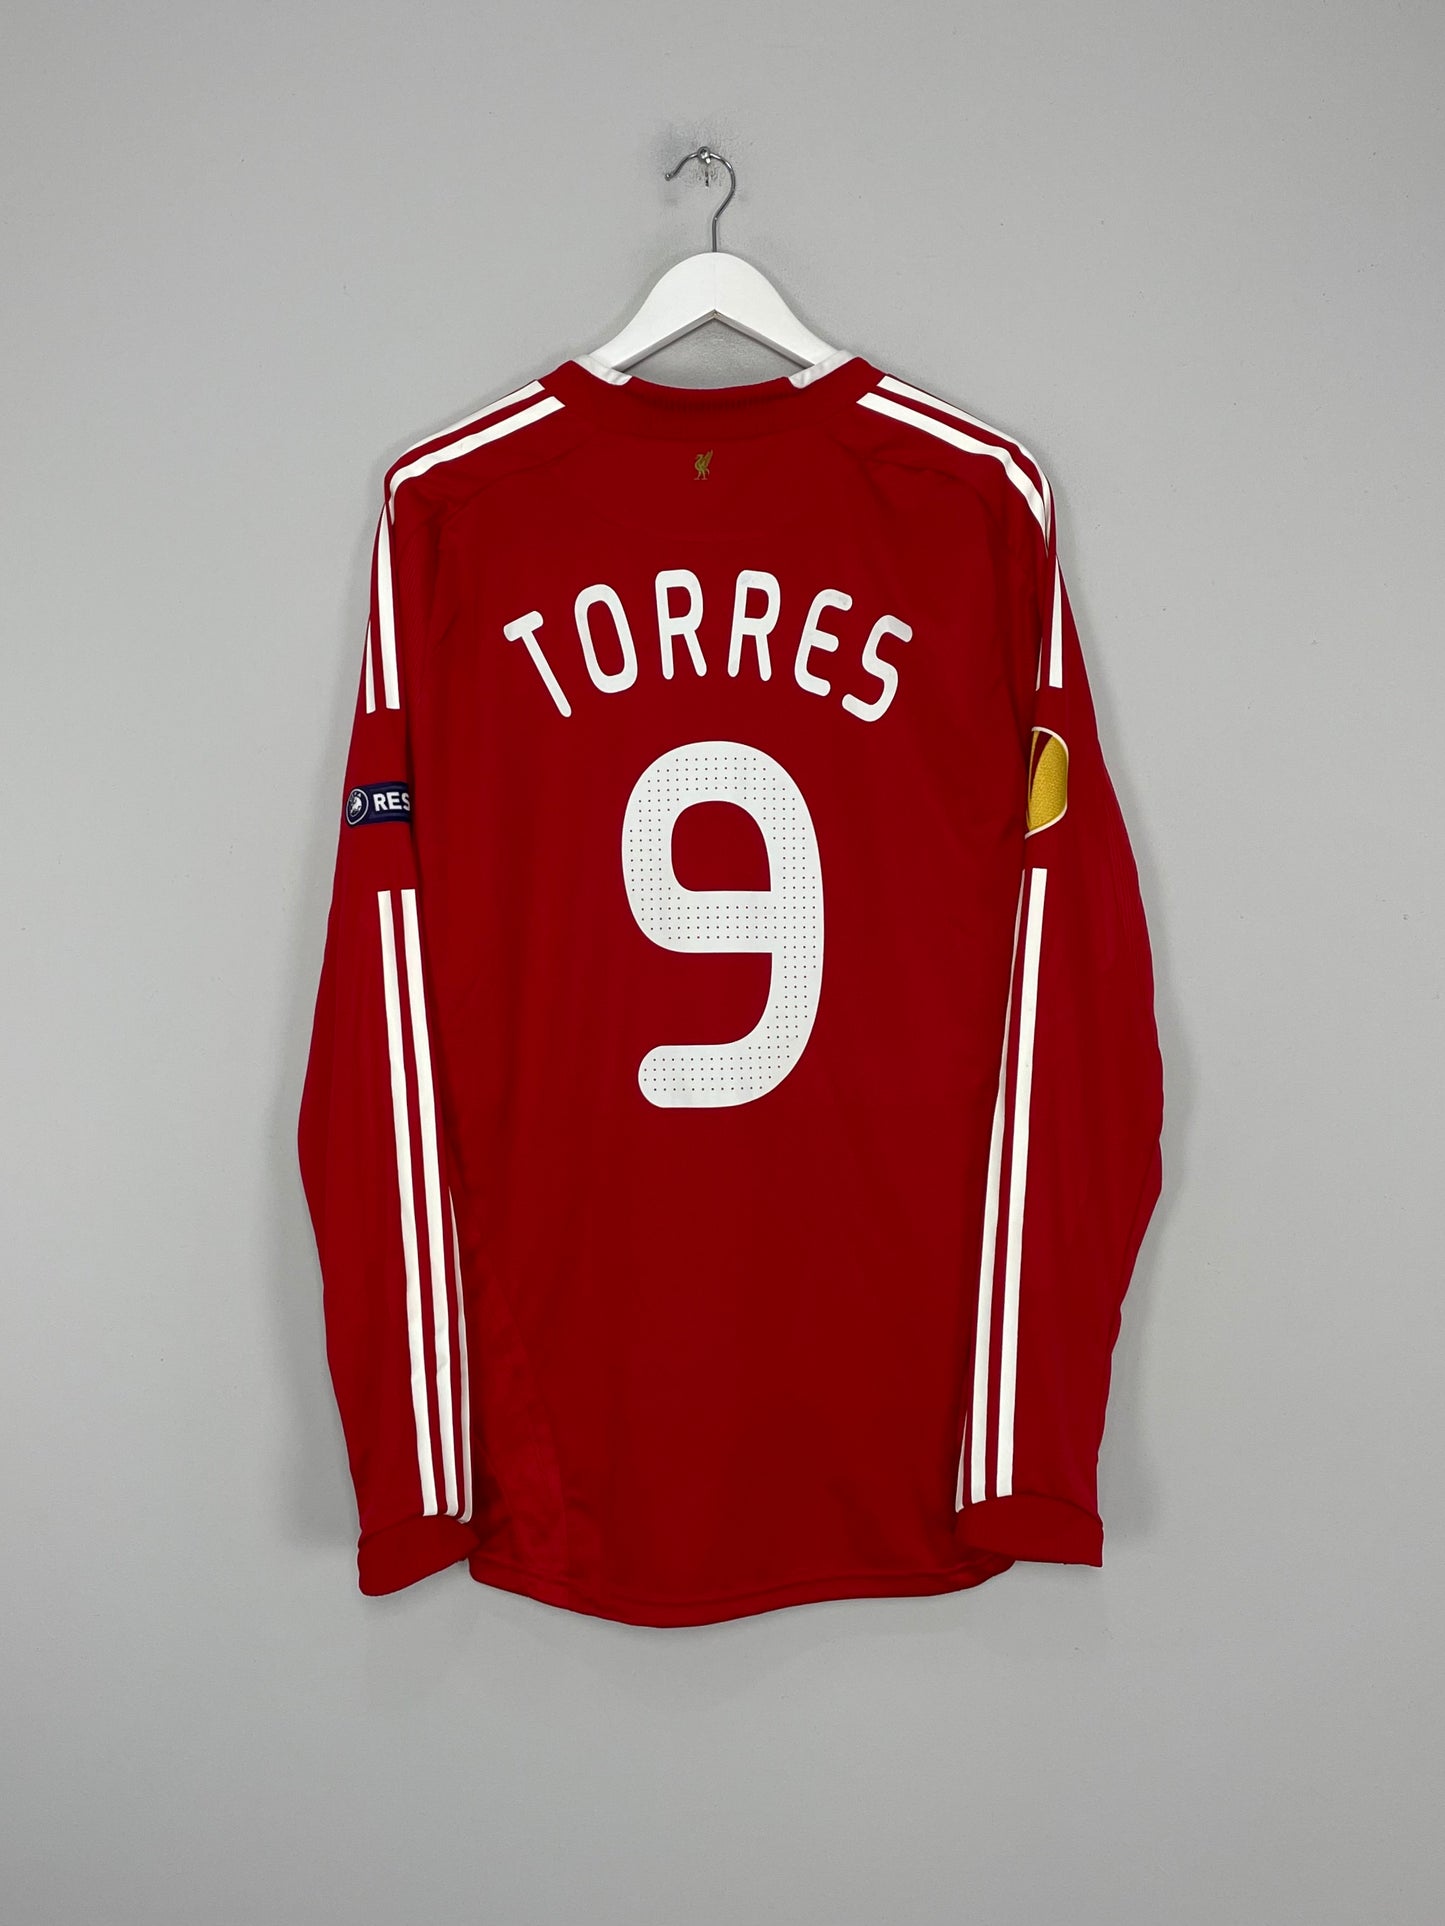 2008/10 LIVERPOOL TORRES #9 E/L L/S *MATCH ISSUE* HOME SHIRT (L) ADIDAS